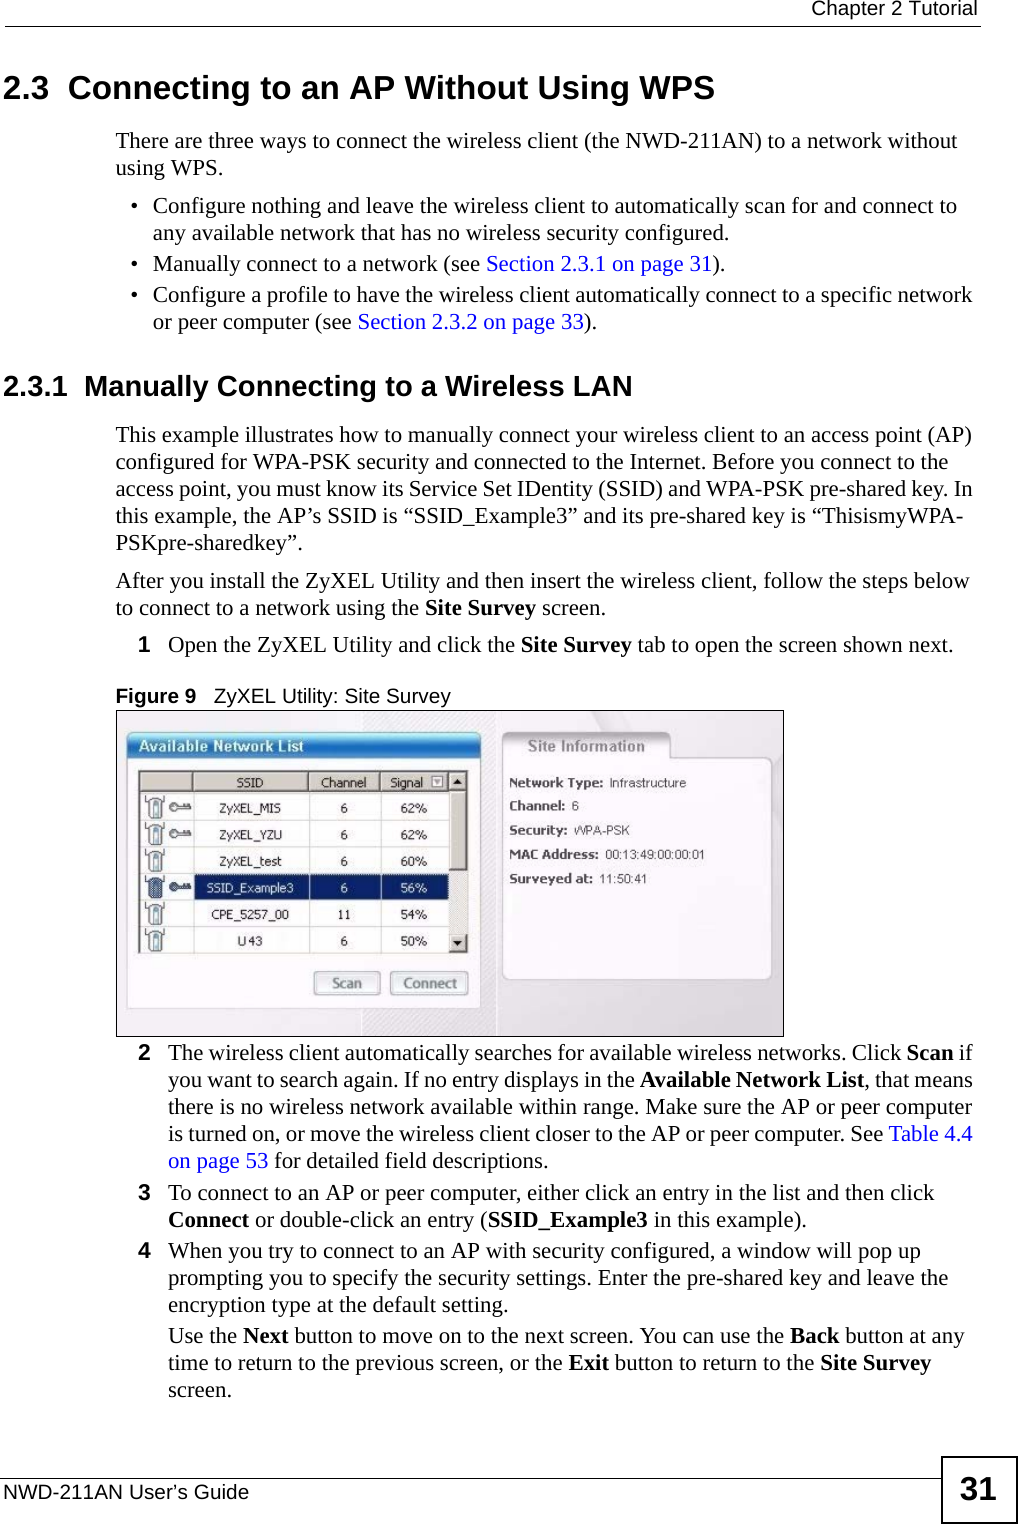  Chapter 2 TutorialNWD-211AN User’s Guide 312.3  Connecting to an AP Without Using WPSThere are three ways to connect the wireless client (the NWD-211AN) to a network without using WPS.• Configure nothing and leave the wireless client to automatically scan for and connect to any available network that has no wireless security configured.• Manually connect to a network (see Section 2.3.1 on page 31).• Configure a profile to have the wireless client automatically connect to a specific network or peer computer (see Section 2.3.2 on page 33). 2.3.1  Manually Connecting to a Wireless LAN This example illustrates how to manually connect your wireless client to an access point (AP) configured for WPA-PSK security and connected to the Internet. Before you connect to the access point, you must know its Service Set IDentity (SSID) and WPA-PSK pre-shared key. In this example, the AP’s SSID is “SSID_Example3” and its pre-shared key is “ThisismyWPA-PSKpre-sharedkey”. After you install the ZyXEL Utility and then insert the wireless client, follow the steps below to connect to a network using the Site Survey screen. 1Open the ZyXEL Utility and click the Site Survey tab to open the screen shown next.Figure 9   ZyXEL Utility: Site Survey2The wireless client automatically searches for available wireless networks. Click Scan if you want to search again. If no entry displays in the Available Network List, that means there is no wireless network available within range. Make sure the AP or peer computer is turned on, or move the wireless client closer to the AP or peer computer. See Table 4.4 on page 53 for detailed field descriptions.3To connect to an AP or peer computer, either click an entry in the list and then click Connect or double-click an entry (SSID_Example3 in this example). 4When you try to connect to an AP with security configured, a window will pop up prompting you to specify the security settings. Enter the pre-shared key and leave the encryption type at the default setting.Use the Next button to move on to the next screen. You can use the Back button at any time to return to the previous screen, or the Exit button to return to the Site Survey screen.